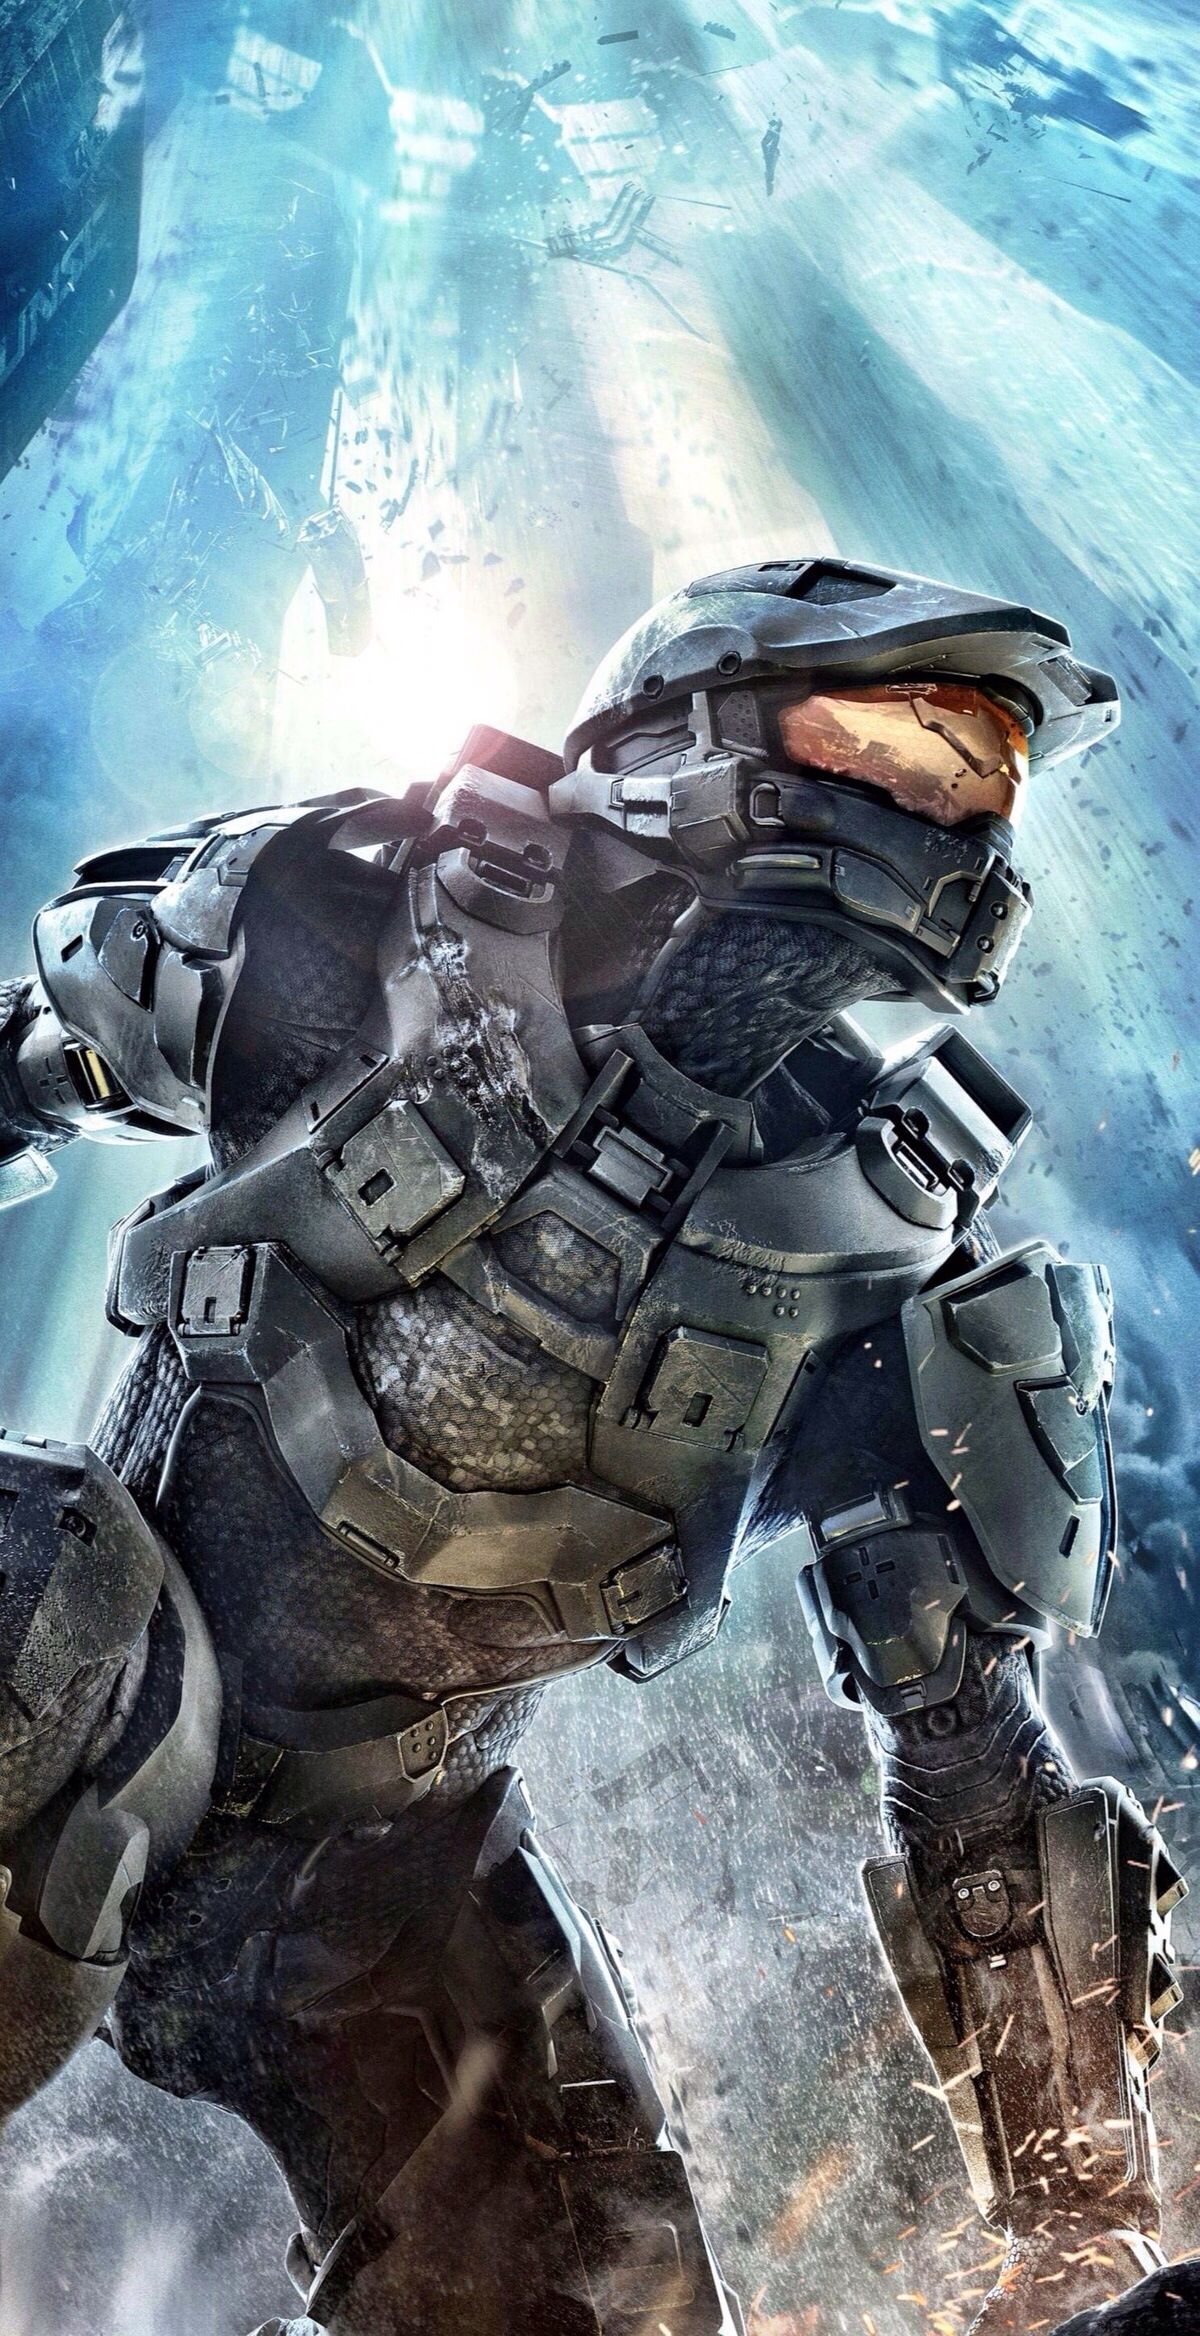 Halo iPhone Wallpaper Free Halo iPhone Background